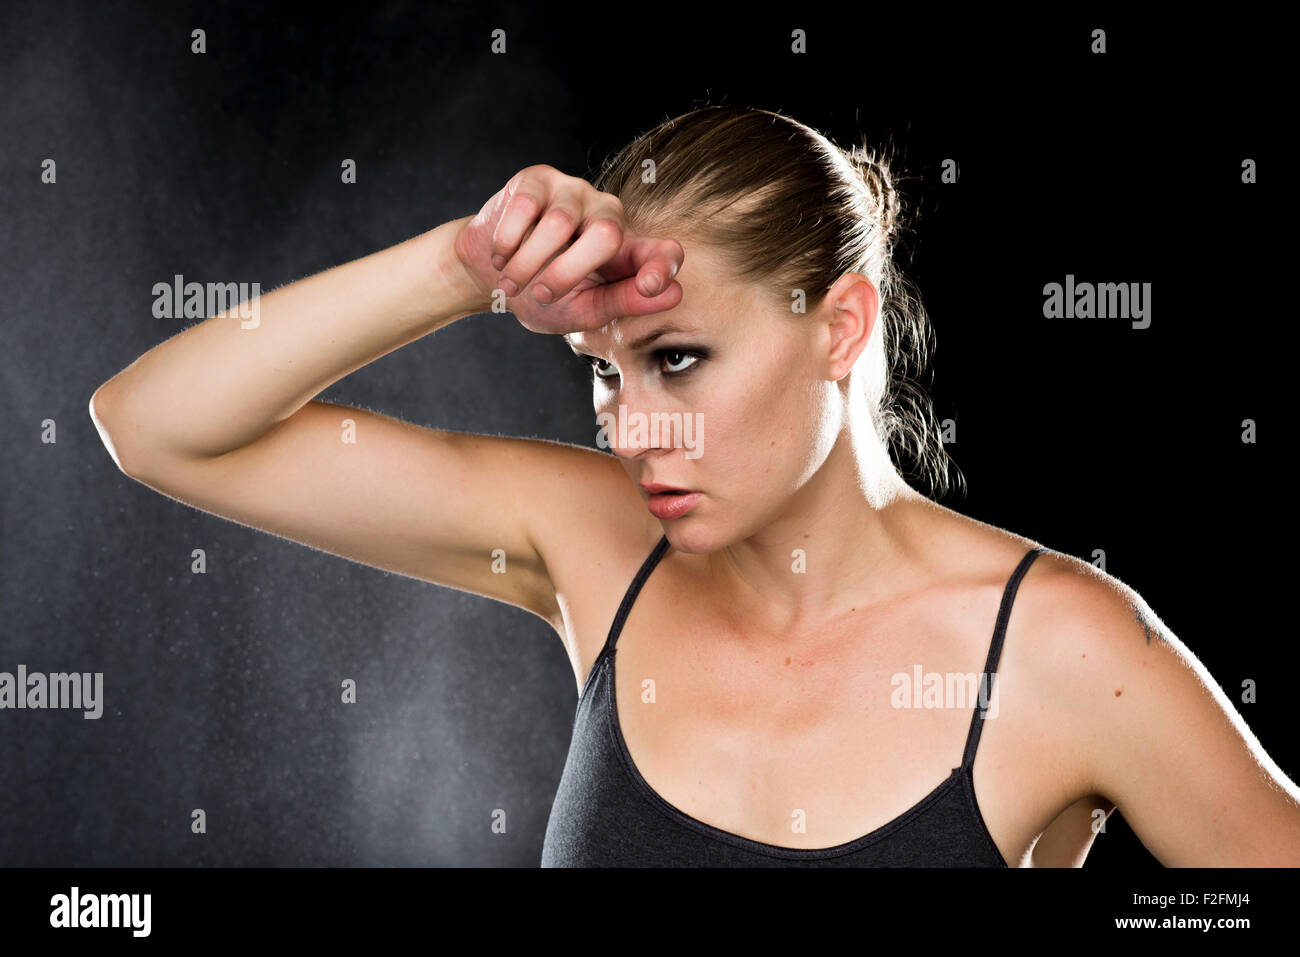 Thoughtful Athletic Woman with Hand on Forehead Stock Photo